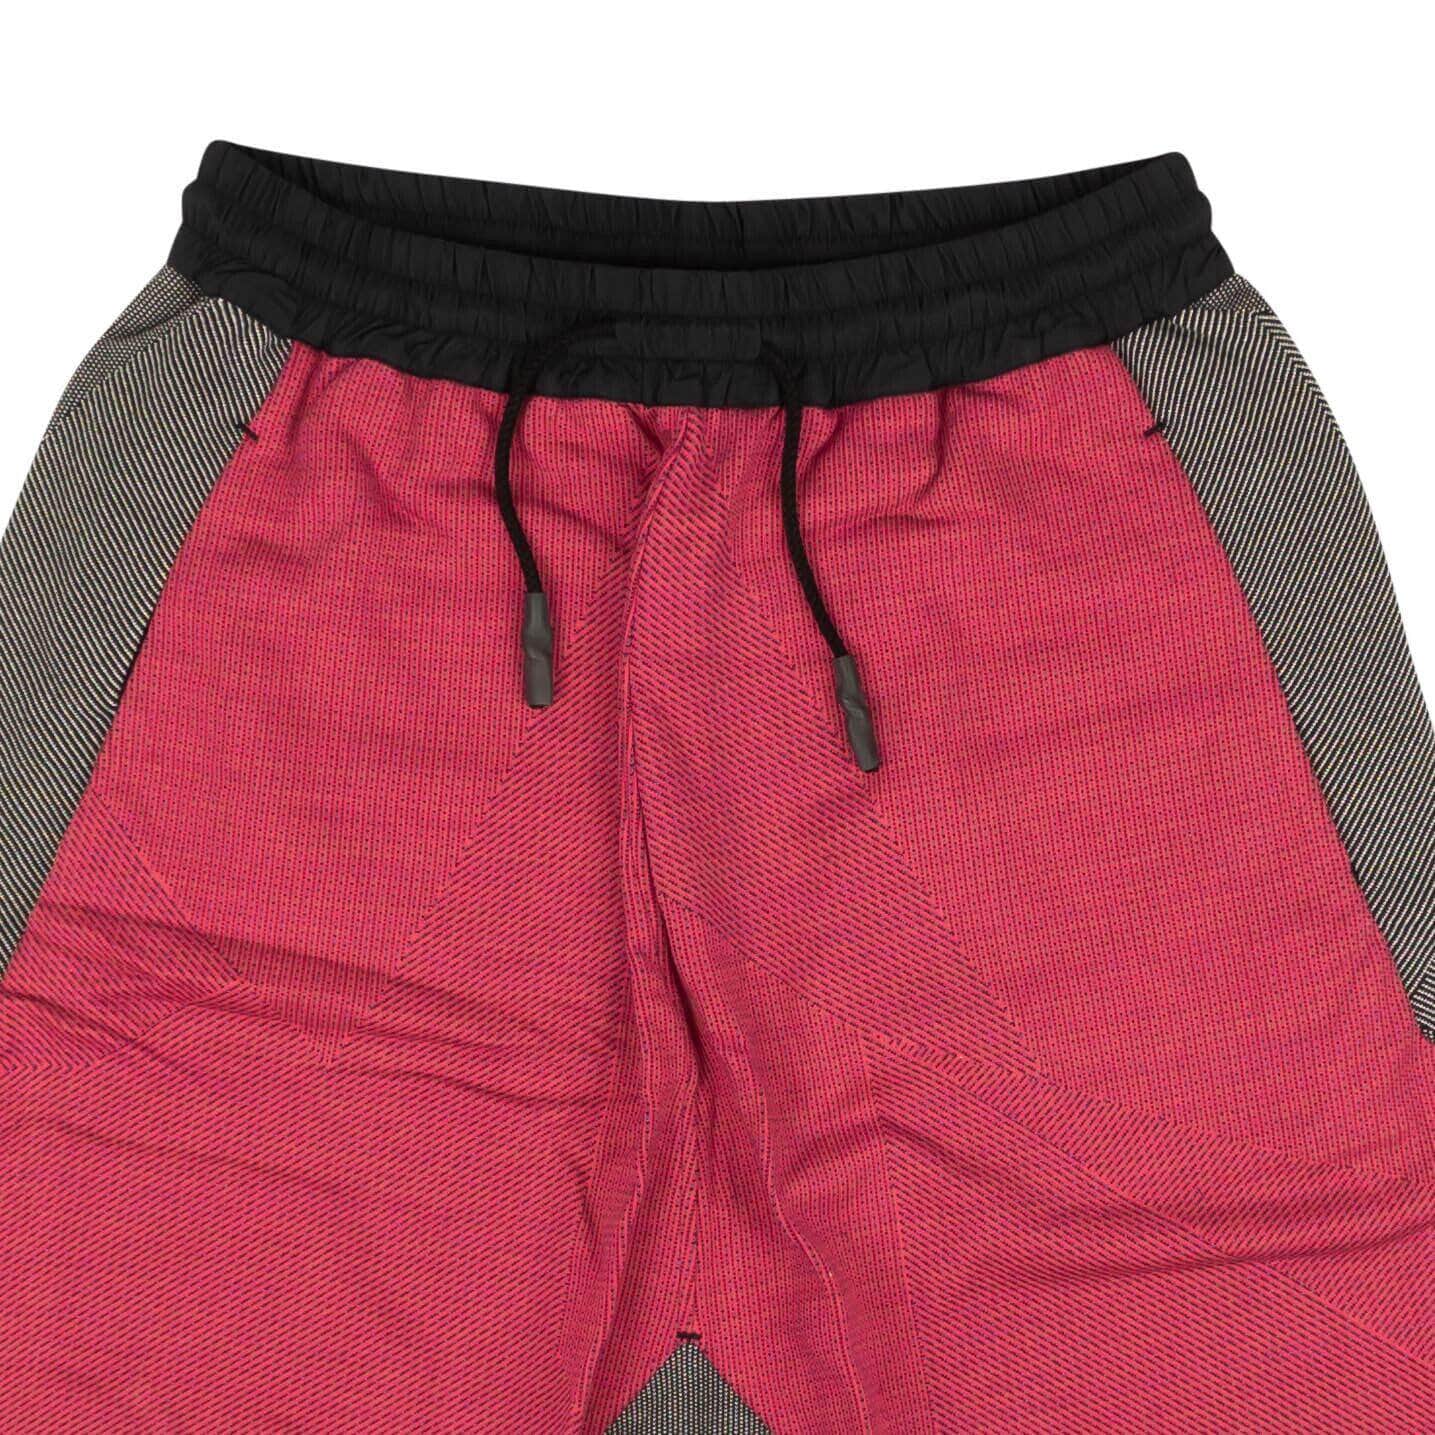 Byborre byborre, channelenable-all, chicmi, couponcollection, gender-mens, main-clothing, mens-shoes, MixedApparel, size-l, size-m, size-s, size-xl, under-250 Fuschia Woven B1 Shorts